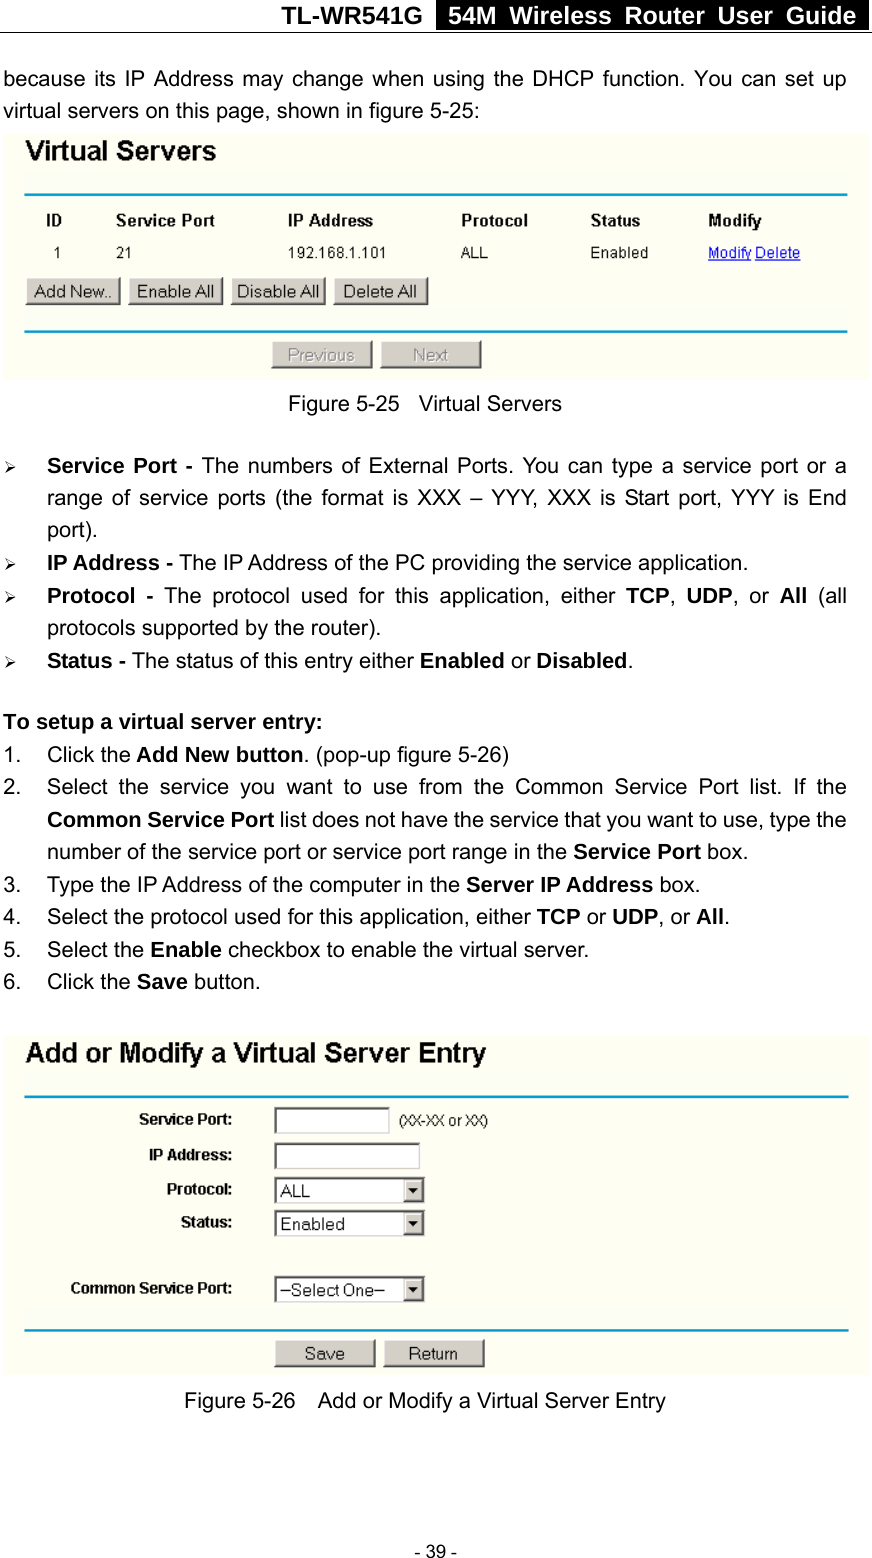 TL-WR541G   54M Wireless Router User Guide  because its IP Address may change when using the DHCP function. You can set up virtual servers on this page, shown in figure 5-25:  Figure 5-25  Virtual Servers ¾ Service Port - The numbers of External Ports. You can type a service port or a range of service ports (the format is XXX – YYY, XXX is Start port, YYY is End port).  ¾ IP Address - The IP Address of the PC providing the service application. ¾ Protocol - The protocol used for this application, either TCP,  UDP, or All  (all protocols supported by the router). ¾ Status - The status of this entry either Enabled or Disabled. To setup a virtual server entry:   1. Click the Add New button. (pop-up figure 5-26) 2.  Select the service you want to use from the Common Service Port list. If the Common Service Port list does not have the service that you want to use, type the number of the service port or service port range in the Service Port box. 3.  Type the IP Address of the computer in the Server IP Address box.  4.  Select the protocol used for this application, either TCP or UDP, or All. 5. Select the Enable checkbox to enable the virtual server. 6. Click the Save button.    Figure 5-26    Add or Modify a Virtual Server Entry  - 39 - 